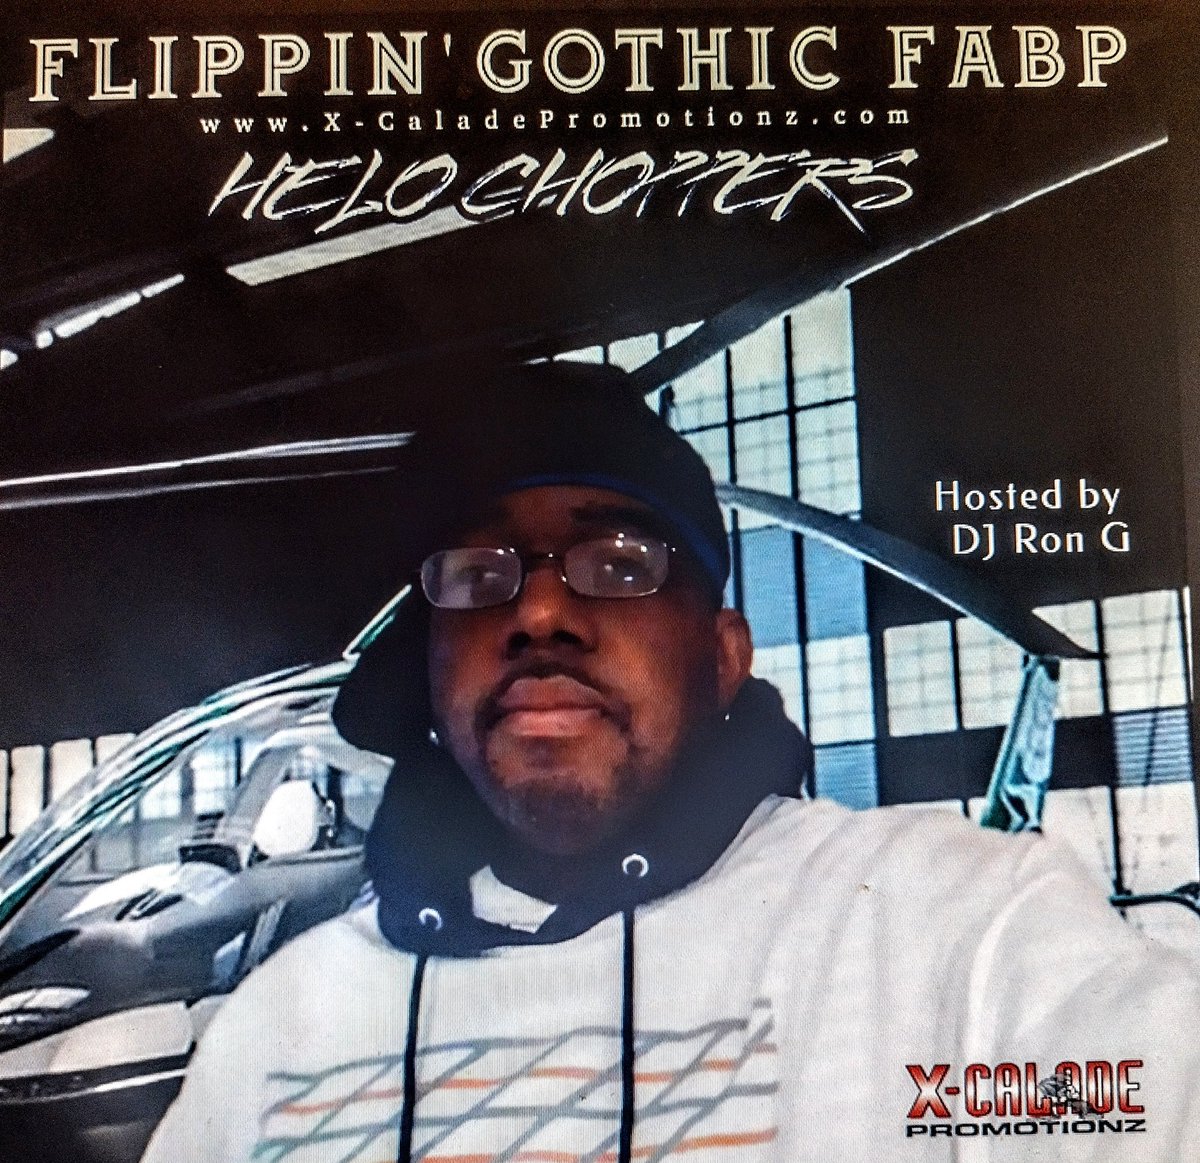 Salute 💎 @LEGENDARYDJRONG 💎 #TheMixtapeGod for Hosting and reposting this phenomenal Mixtape 'Helo Choppers' by Flippin' Gothic Fabp that is now #LiveAndInLivingColor. #WarIzHot and #PeaceIzCold #MadeInTheUSA 🦅🐝🥷🇺🇲💎💿
audiomack.com/mixkingenterta…